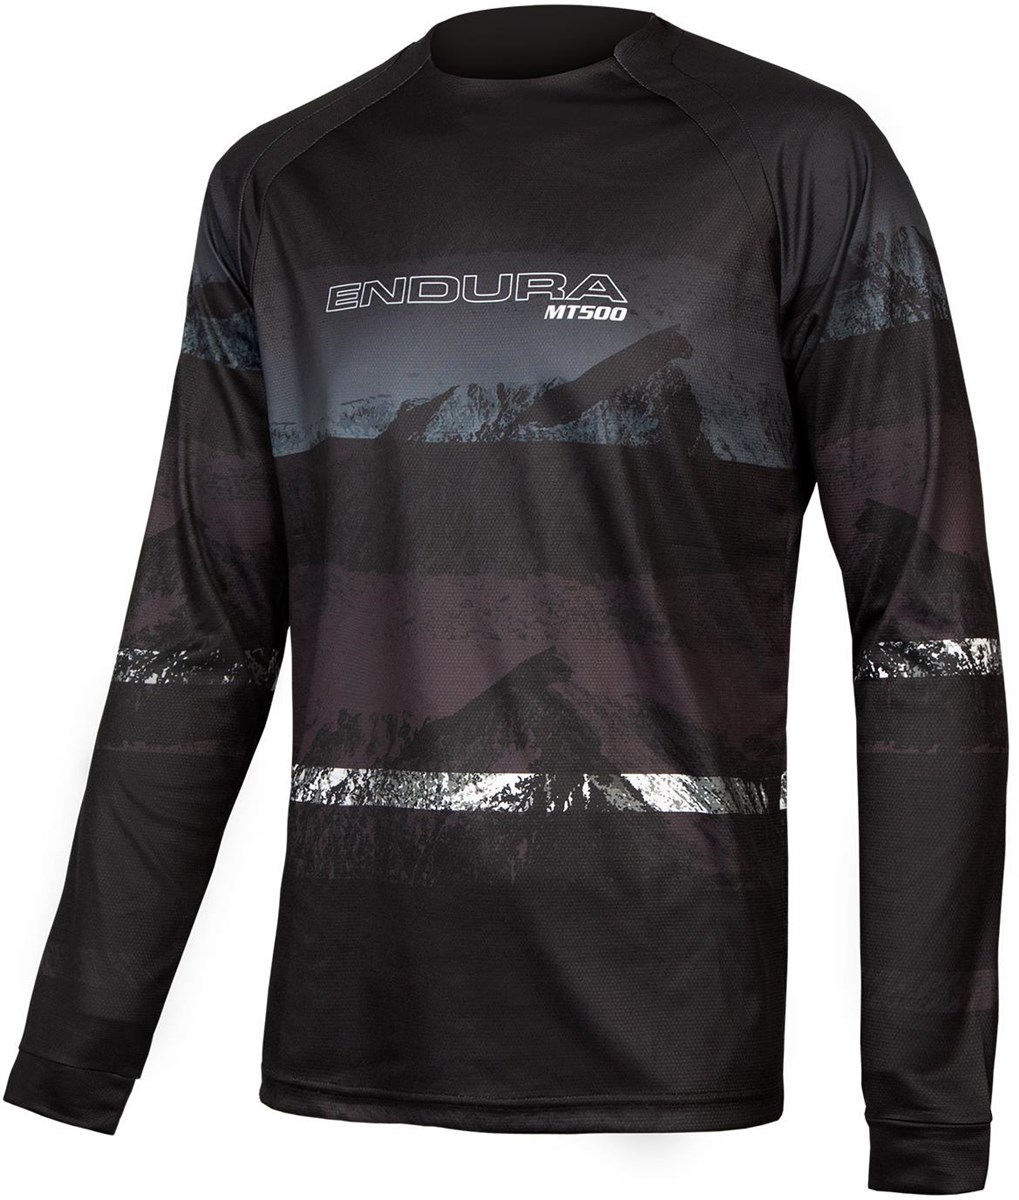 Endura MT500 Scenic Long Sleeve Cycling Tee Jersey Limited Edition product image